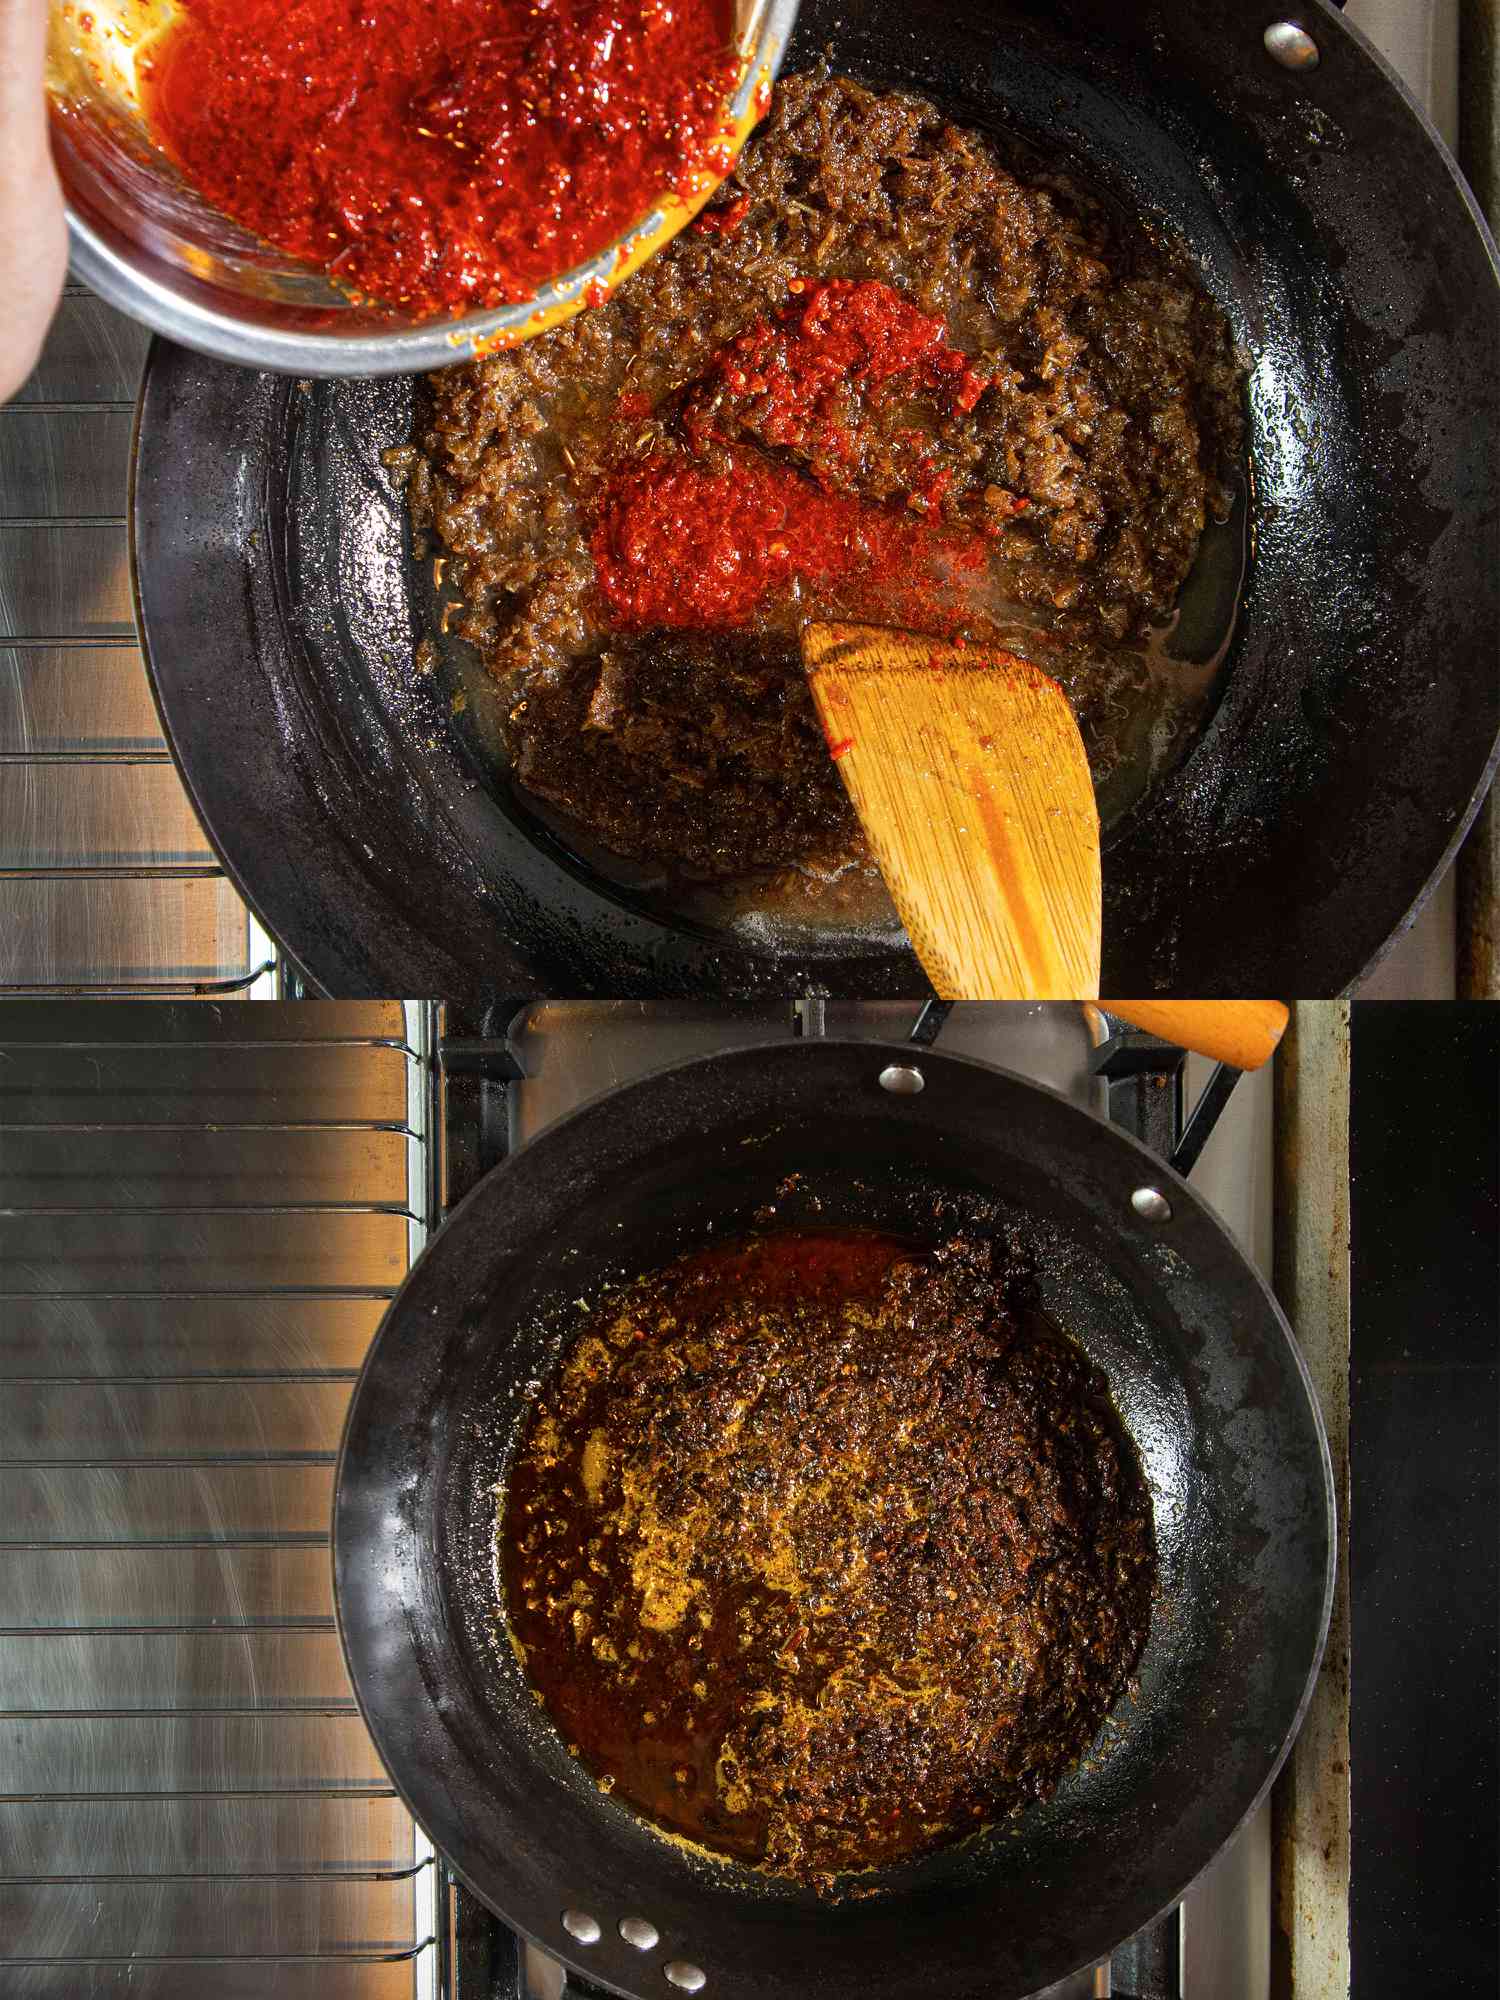 Two image collage of chile added to wok and after cooking